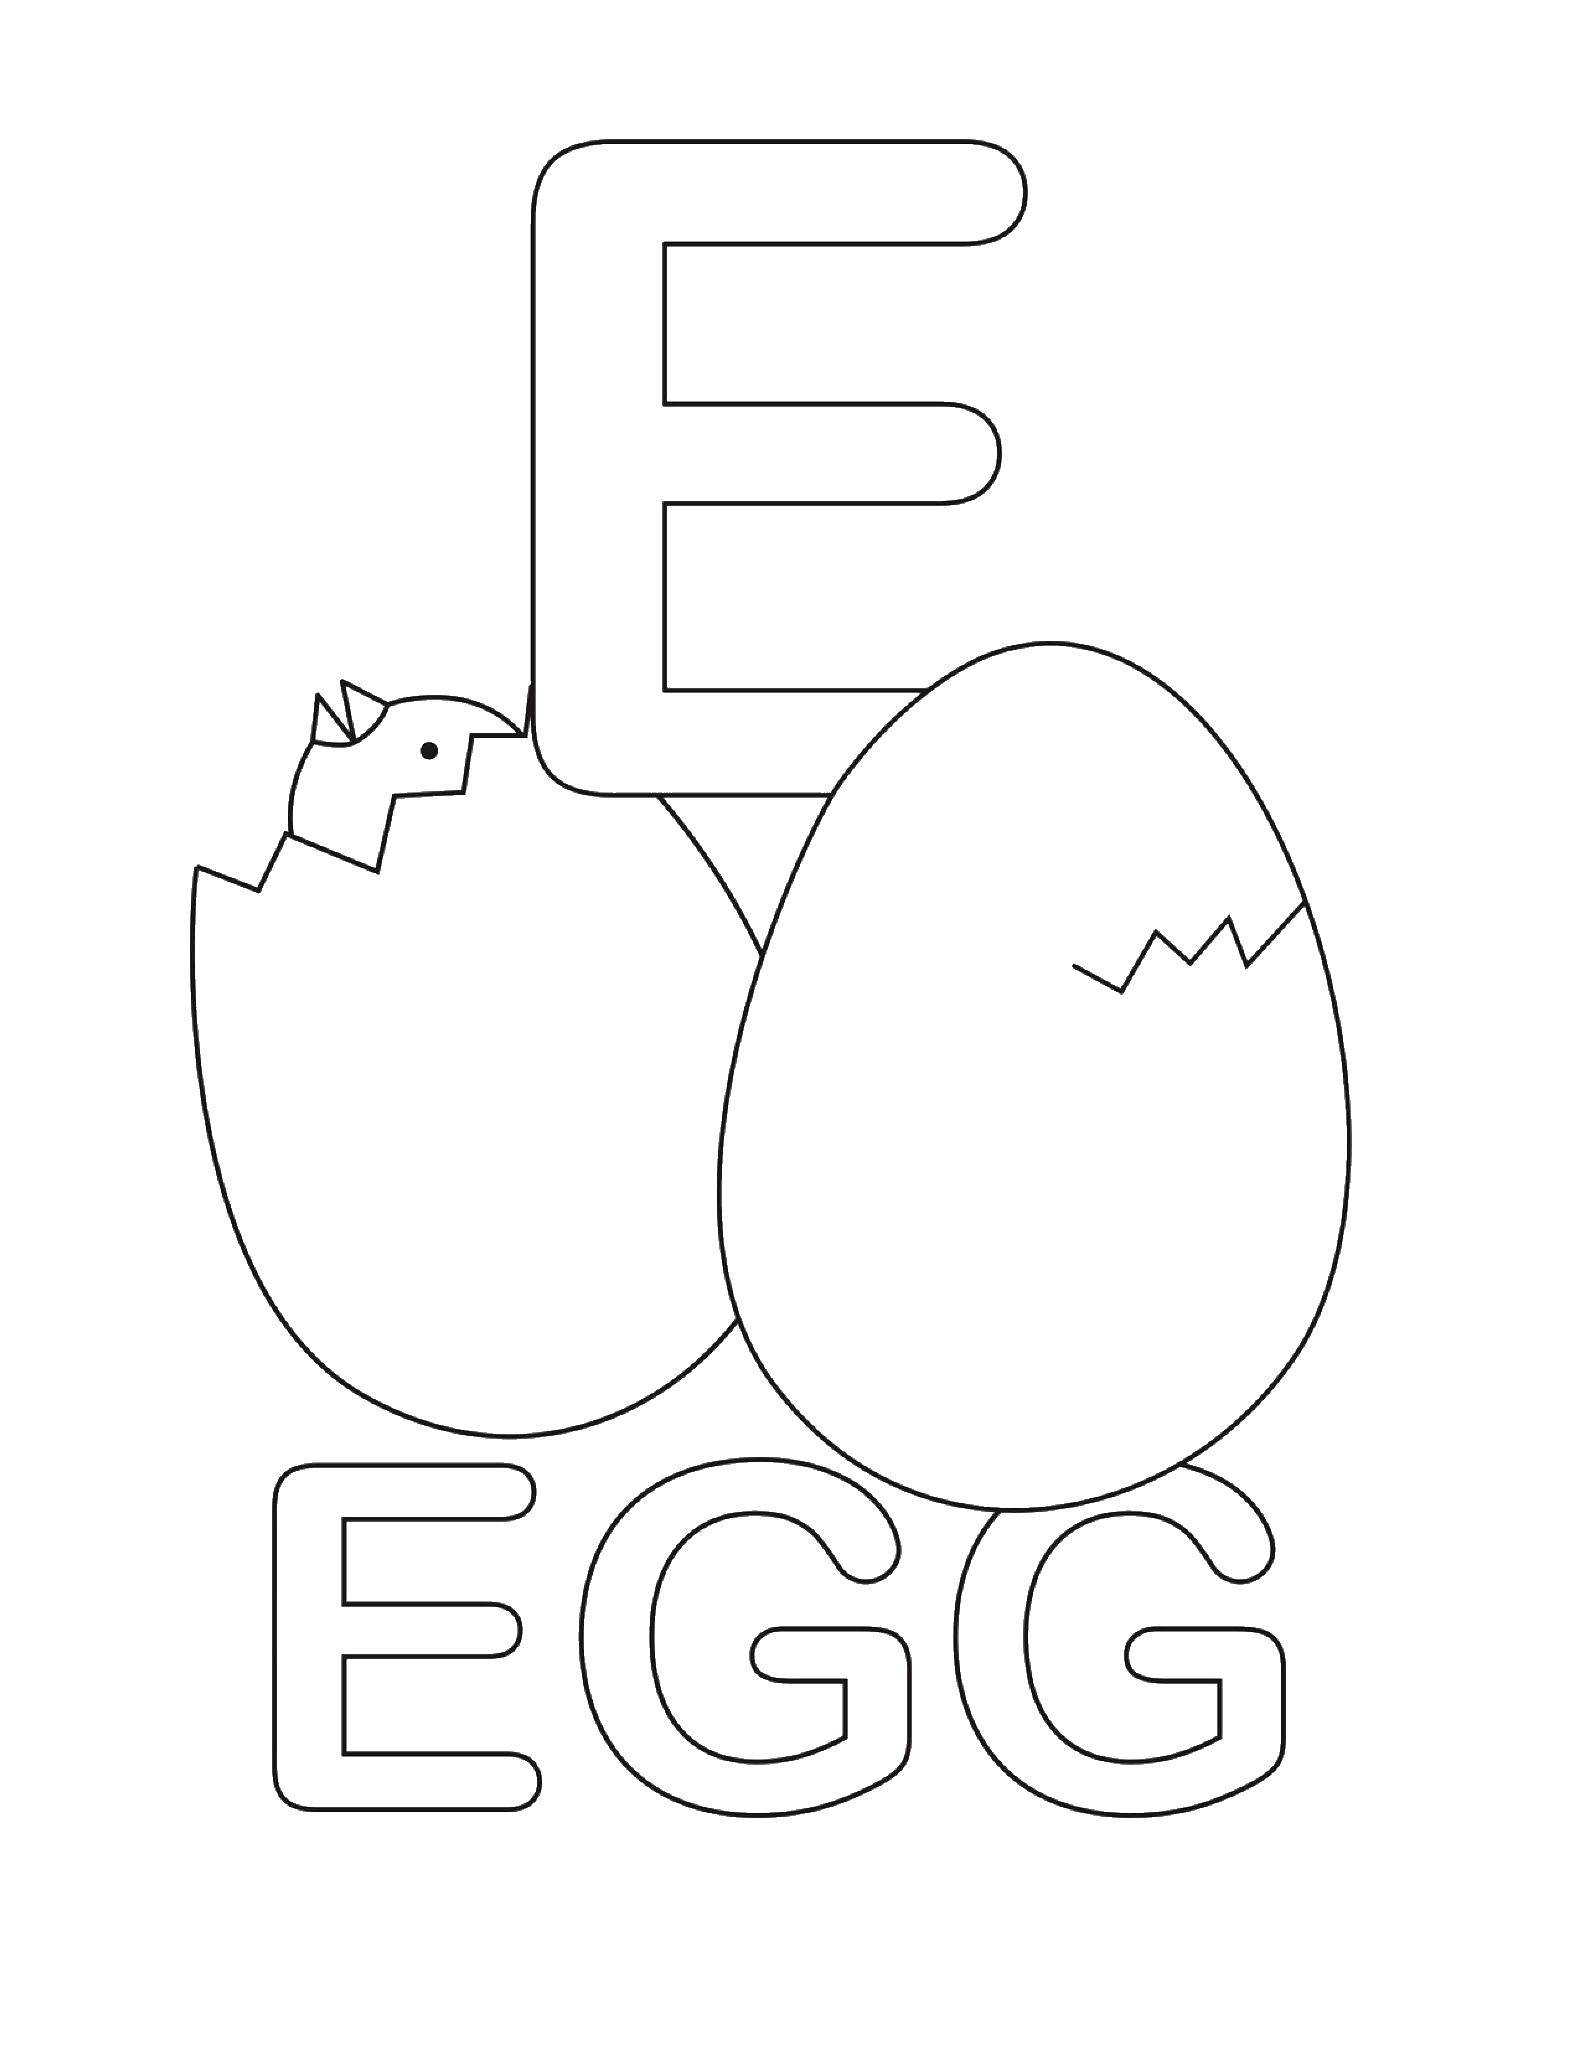 Coloring I egg. Category English words. Tags:  English.